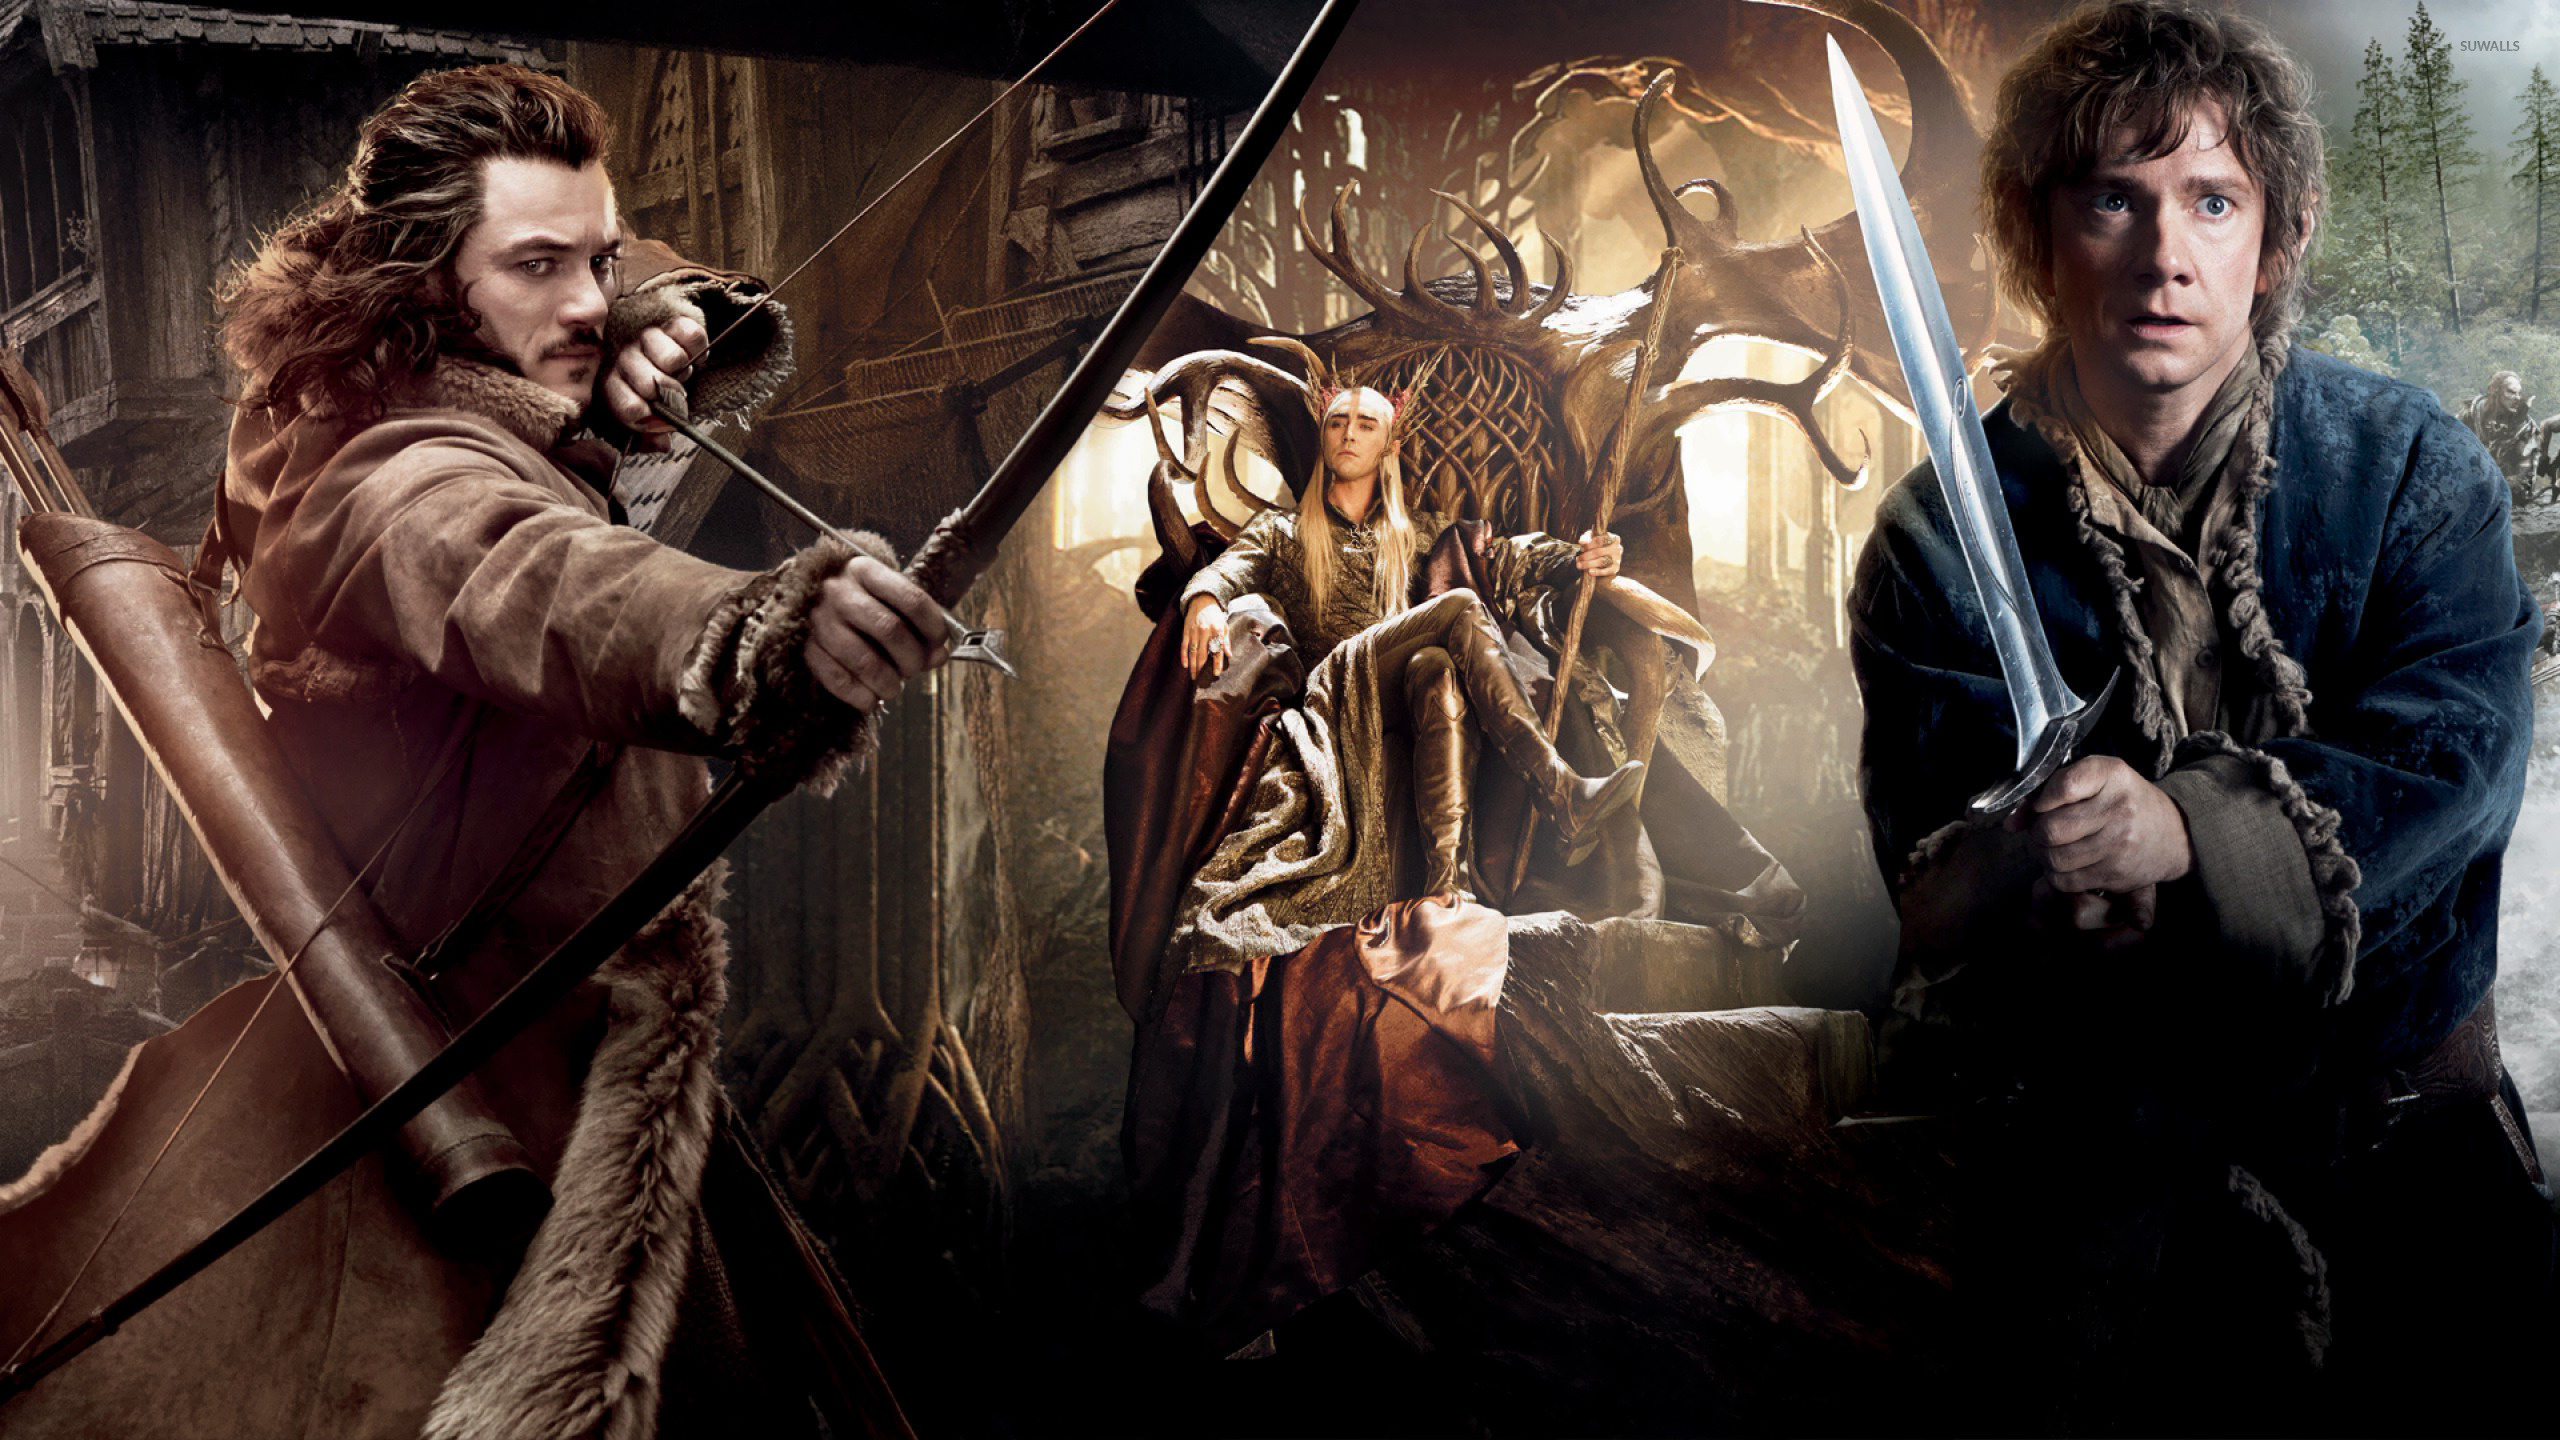 The Hobbit: The Desolation of Smaug wallpaper, Movie wallpapers, Epic adventure, 2560x1440 HD Desktop